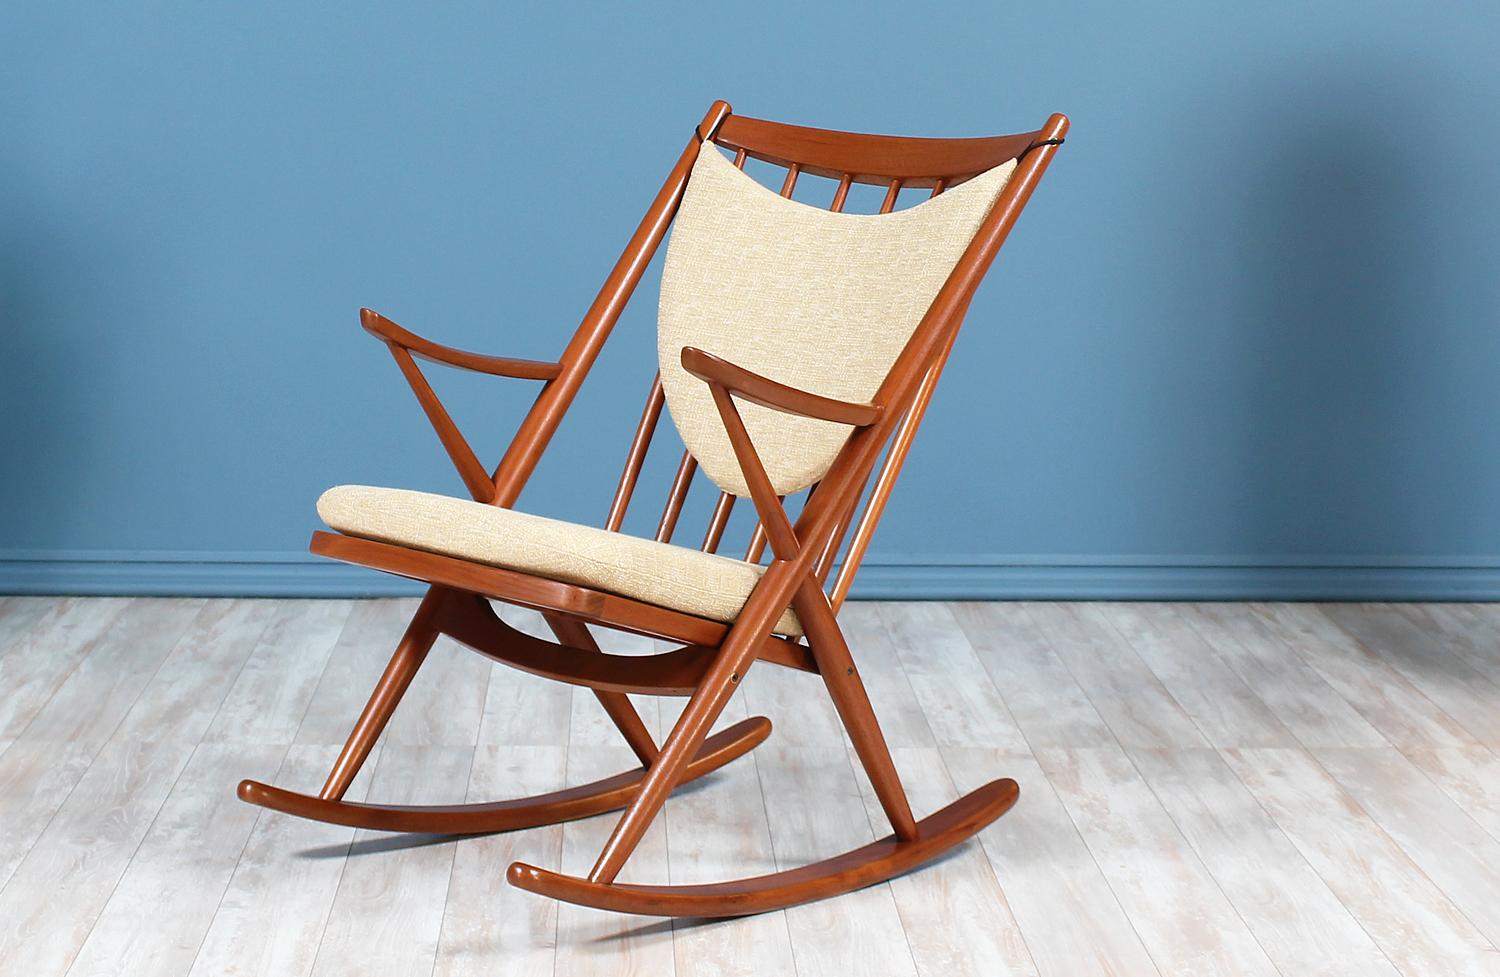 Comfortable rocking chair designed by Frank Reenskaug for Bramin Møbler in Denmark circa 1960’s. Features a teak wood frame with six vertical spindles on the open back for support. The sides, below the arm rests, feature an X-shape that connects the